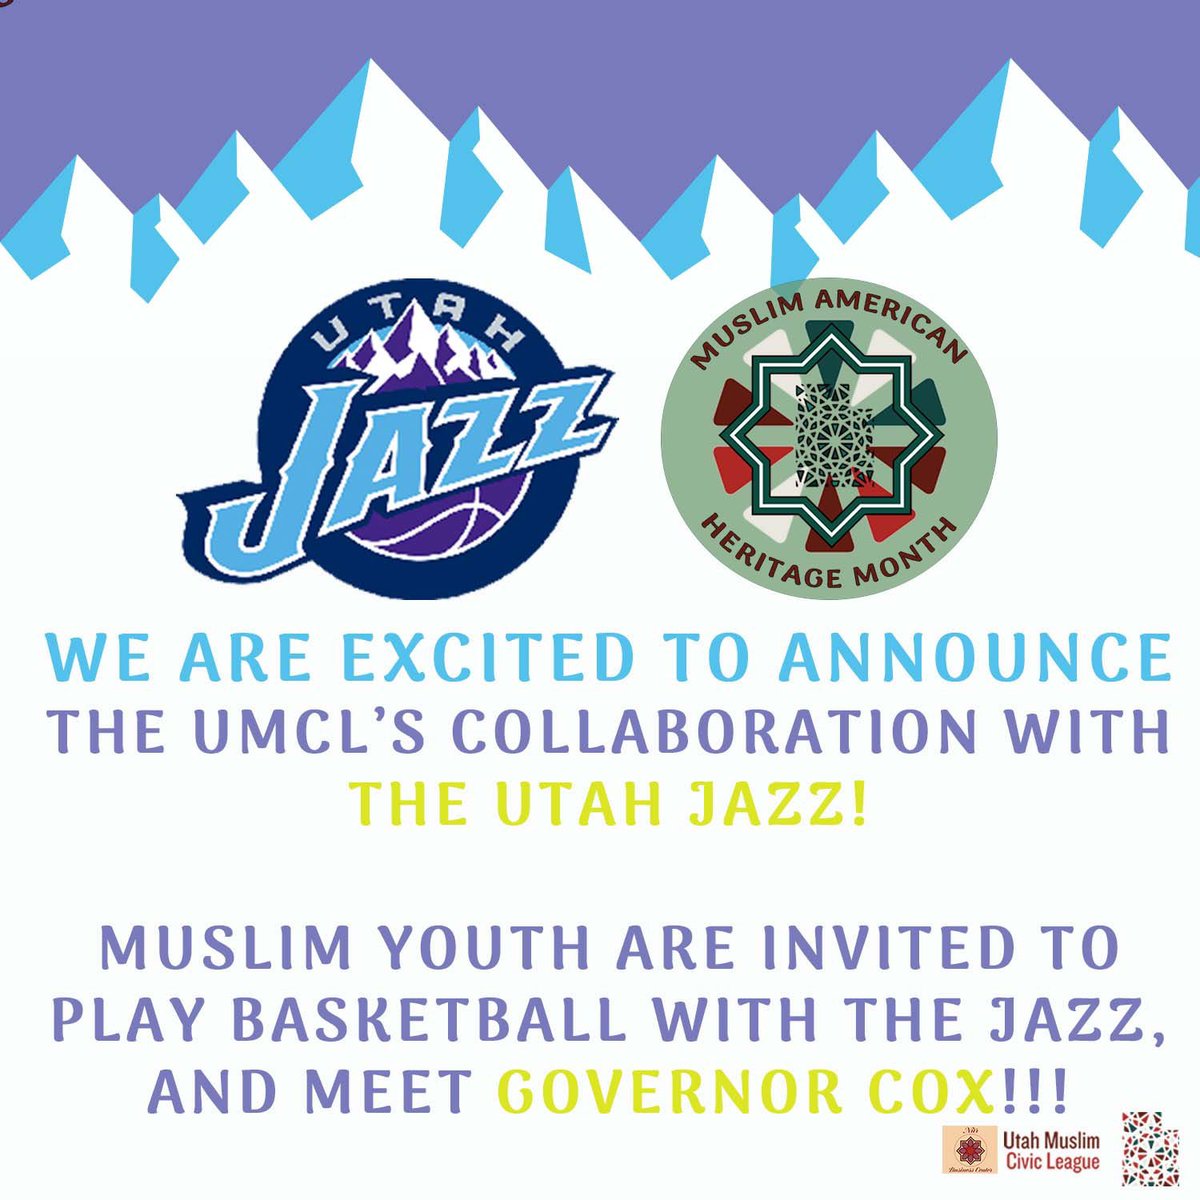 We are thrilled to share the exciting news that the Utah Muslim Civic League will be teaming up with the Utah Jazz & Governor Cox for a special Muslim Heritage Month Celebration! 
Link in bio to register for youth clinic!! https://t.co/XKpn609hmx